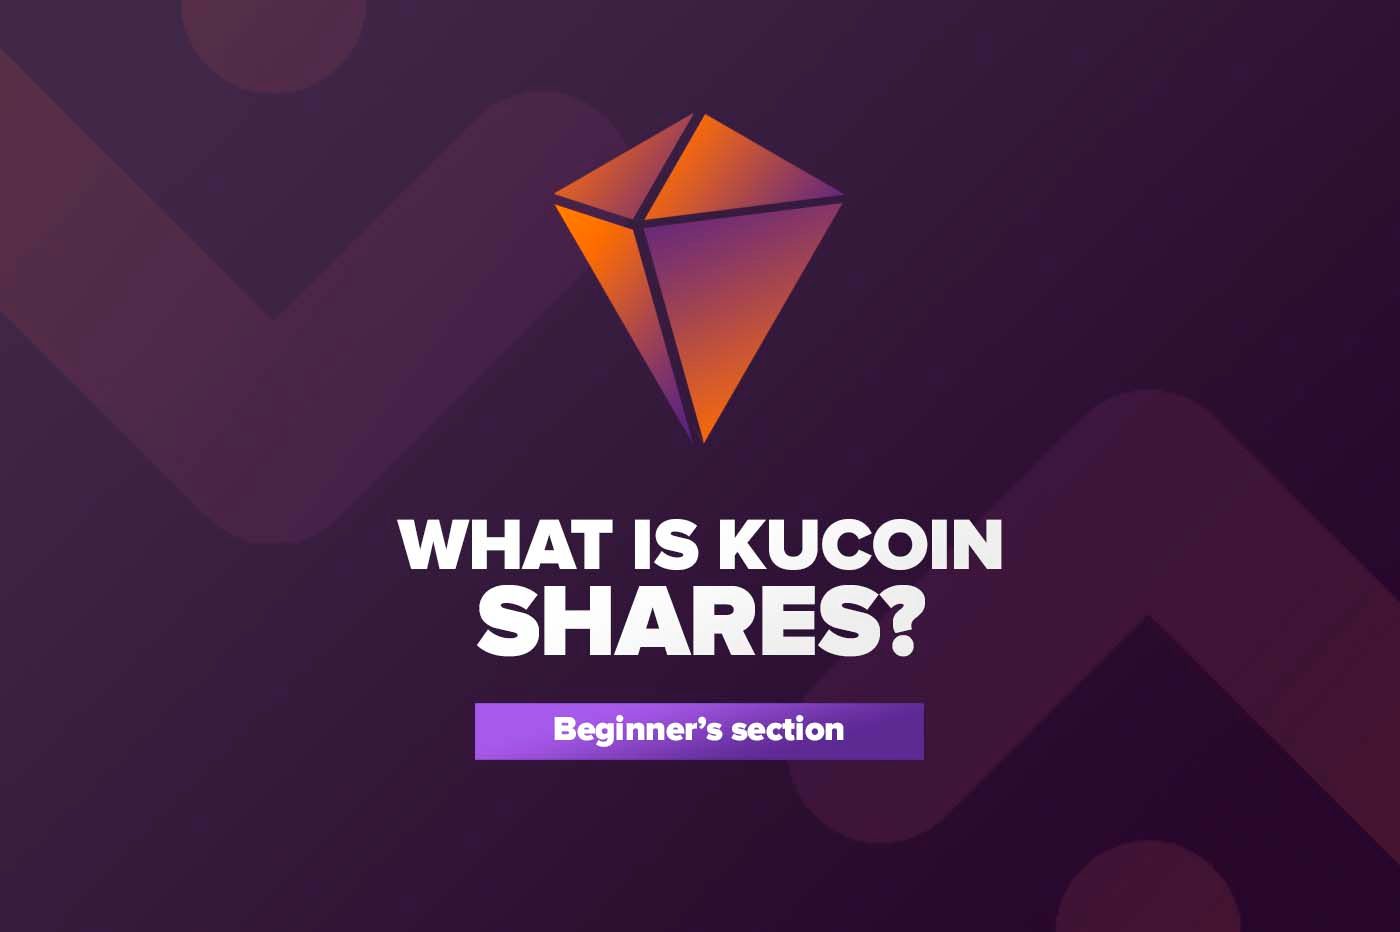 The Complete Guide to KuCoin Shares